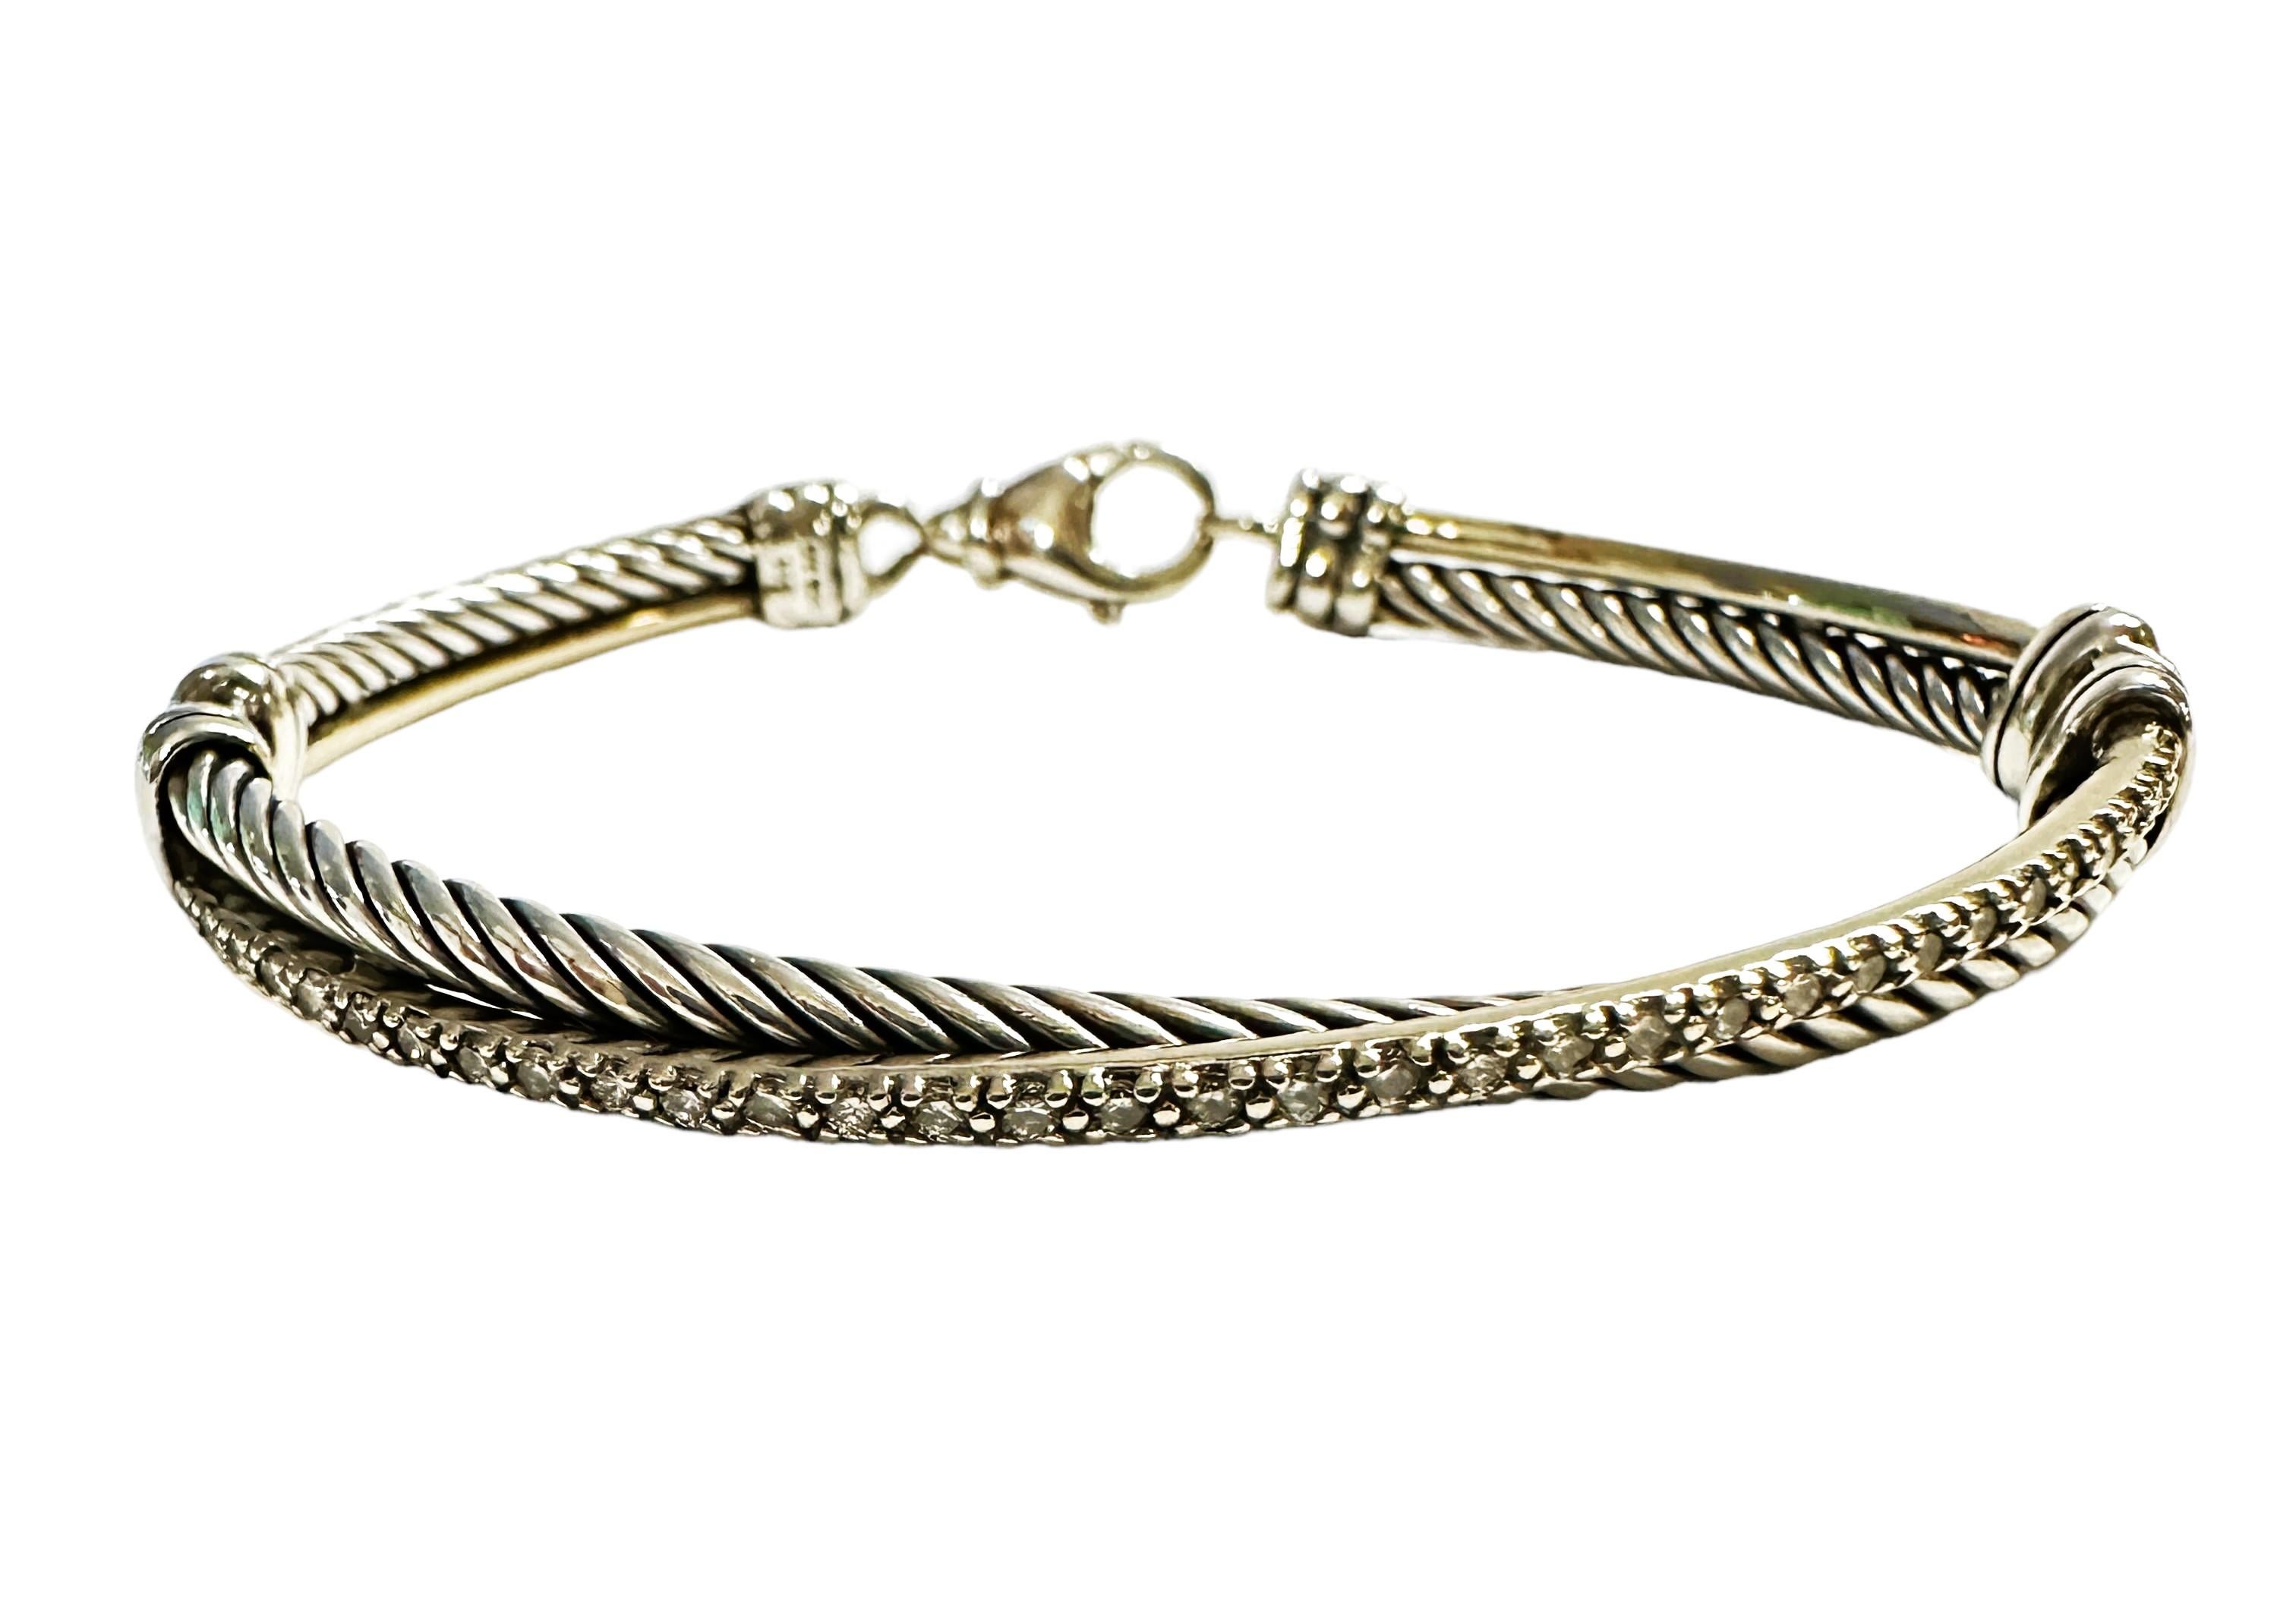 This is a fabulous bracelet by David Yurman.  He mixes 535 White Gold with 925 Sterling Silver to create this beautiful Crossover Bracelet with Pave Diamonds.  He uses a dynamic range of smooth and cabled cords, the individual strands are